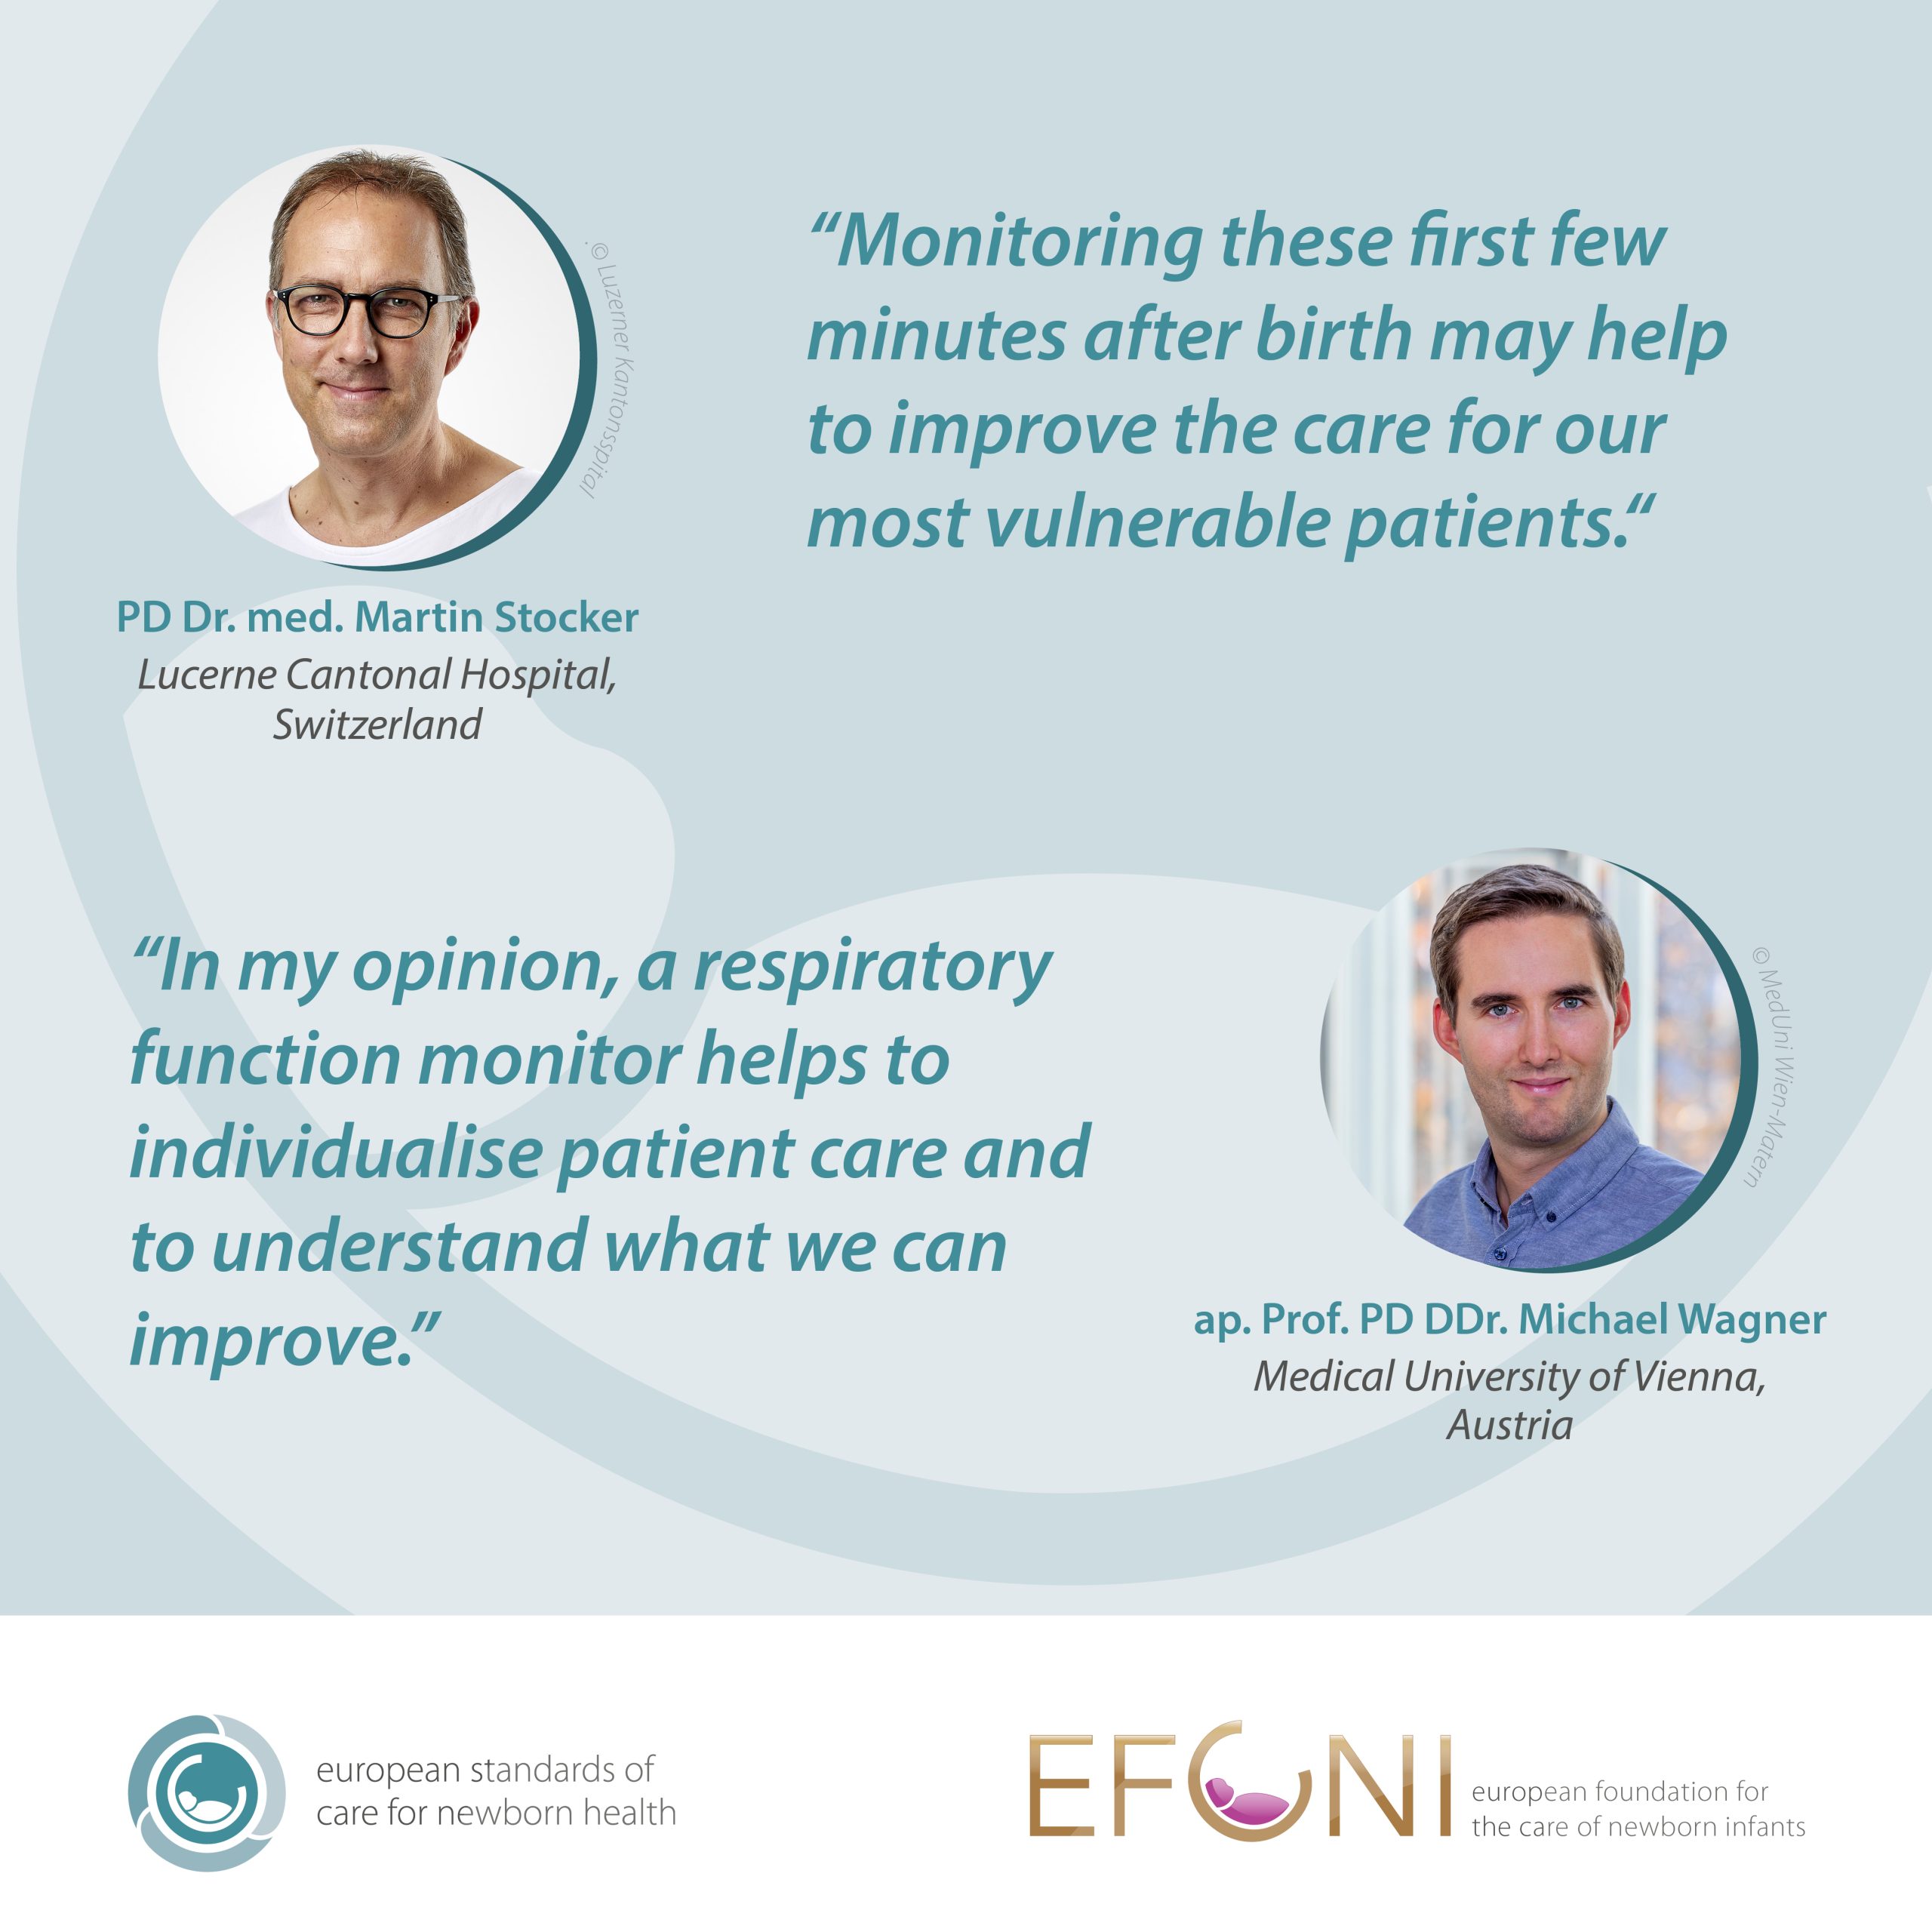 Two quotes from experts on manual ventilation